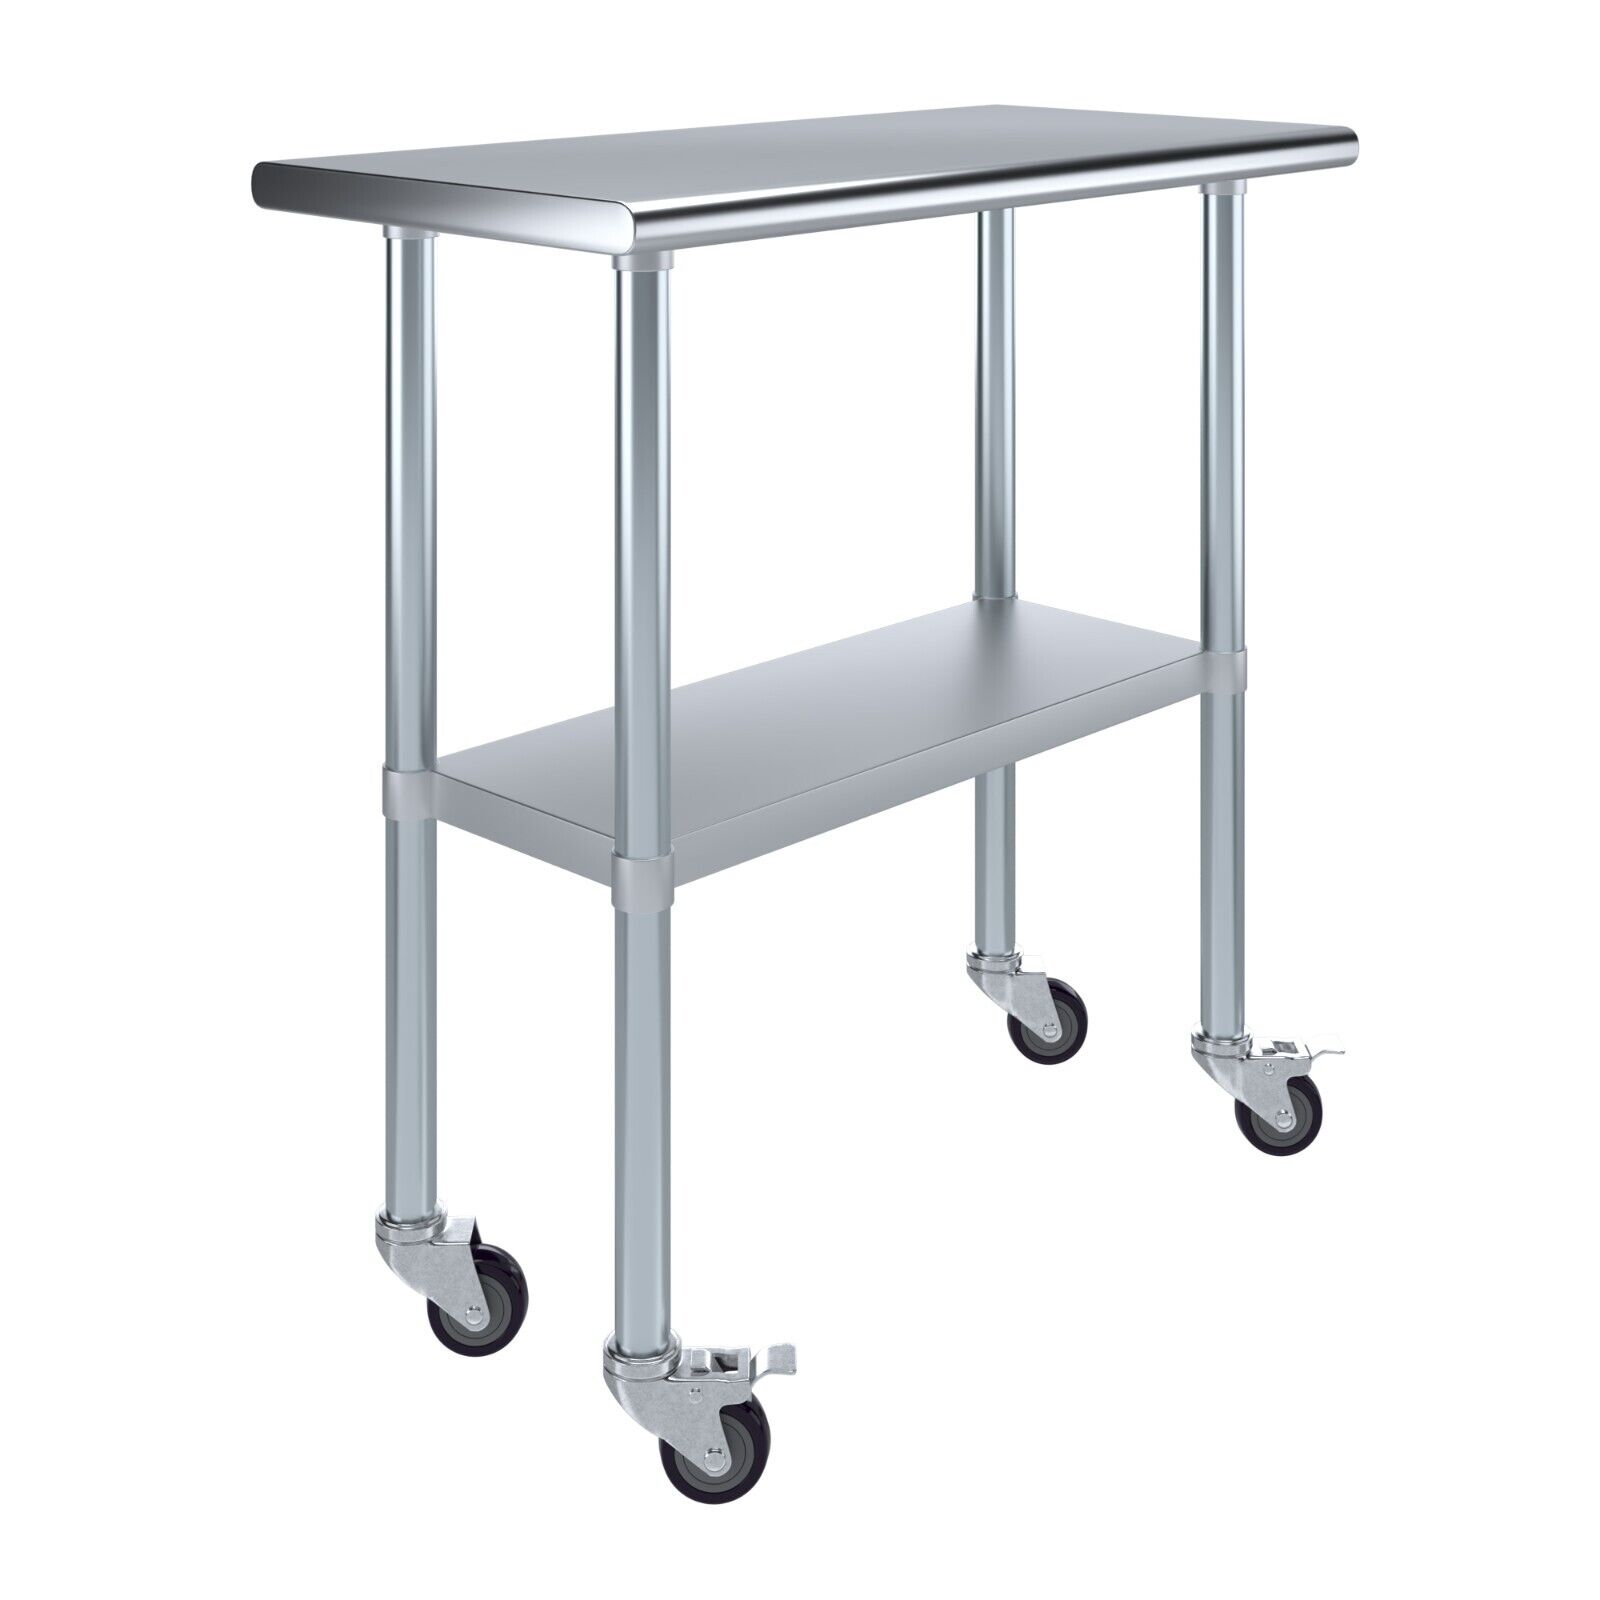 18 in. x 36 in. Stainless Steel Work Table with Casters | Work Station